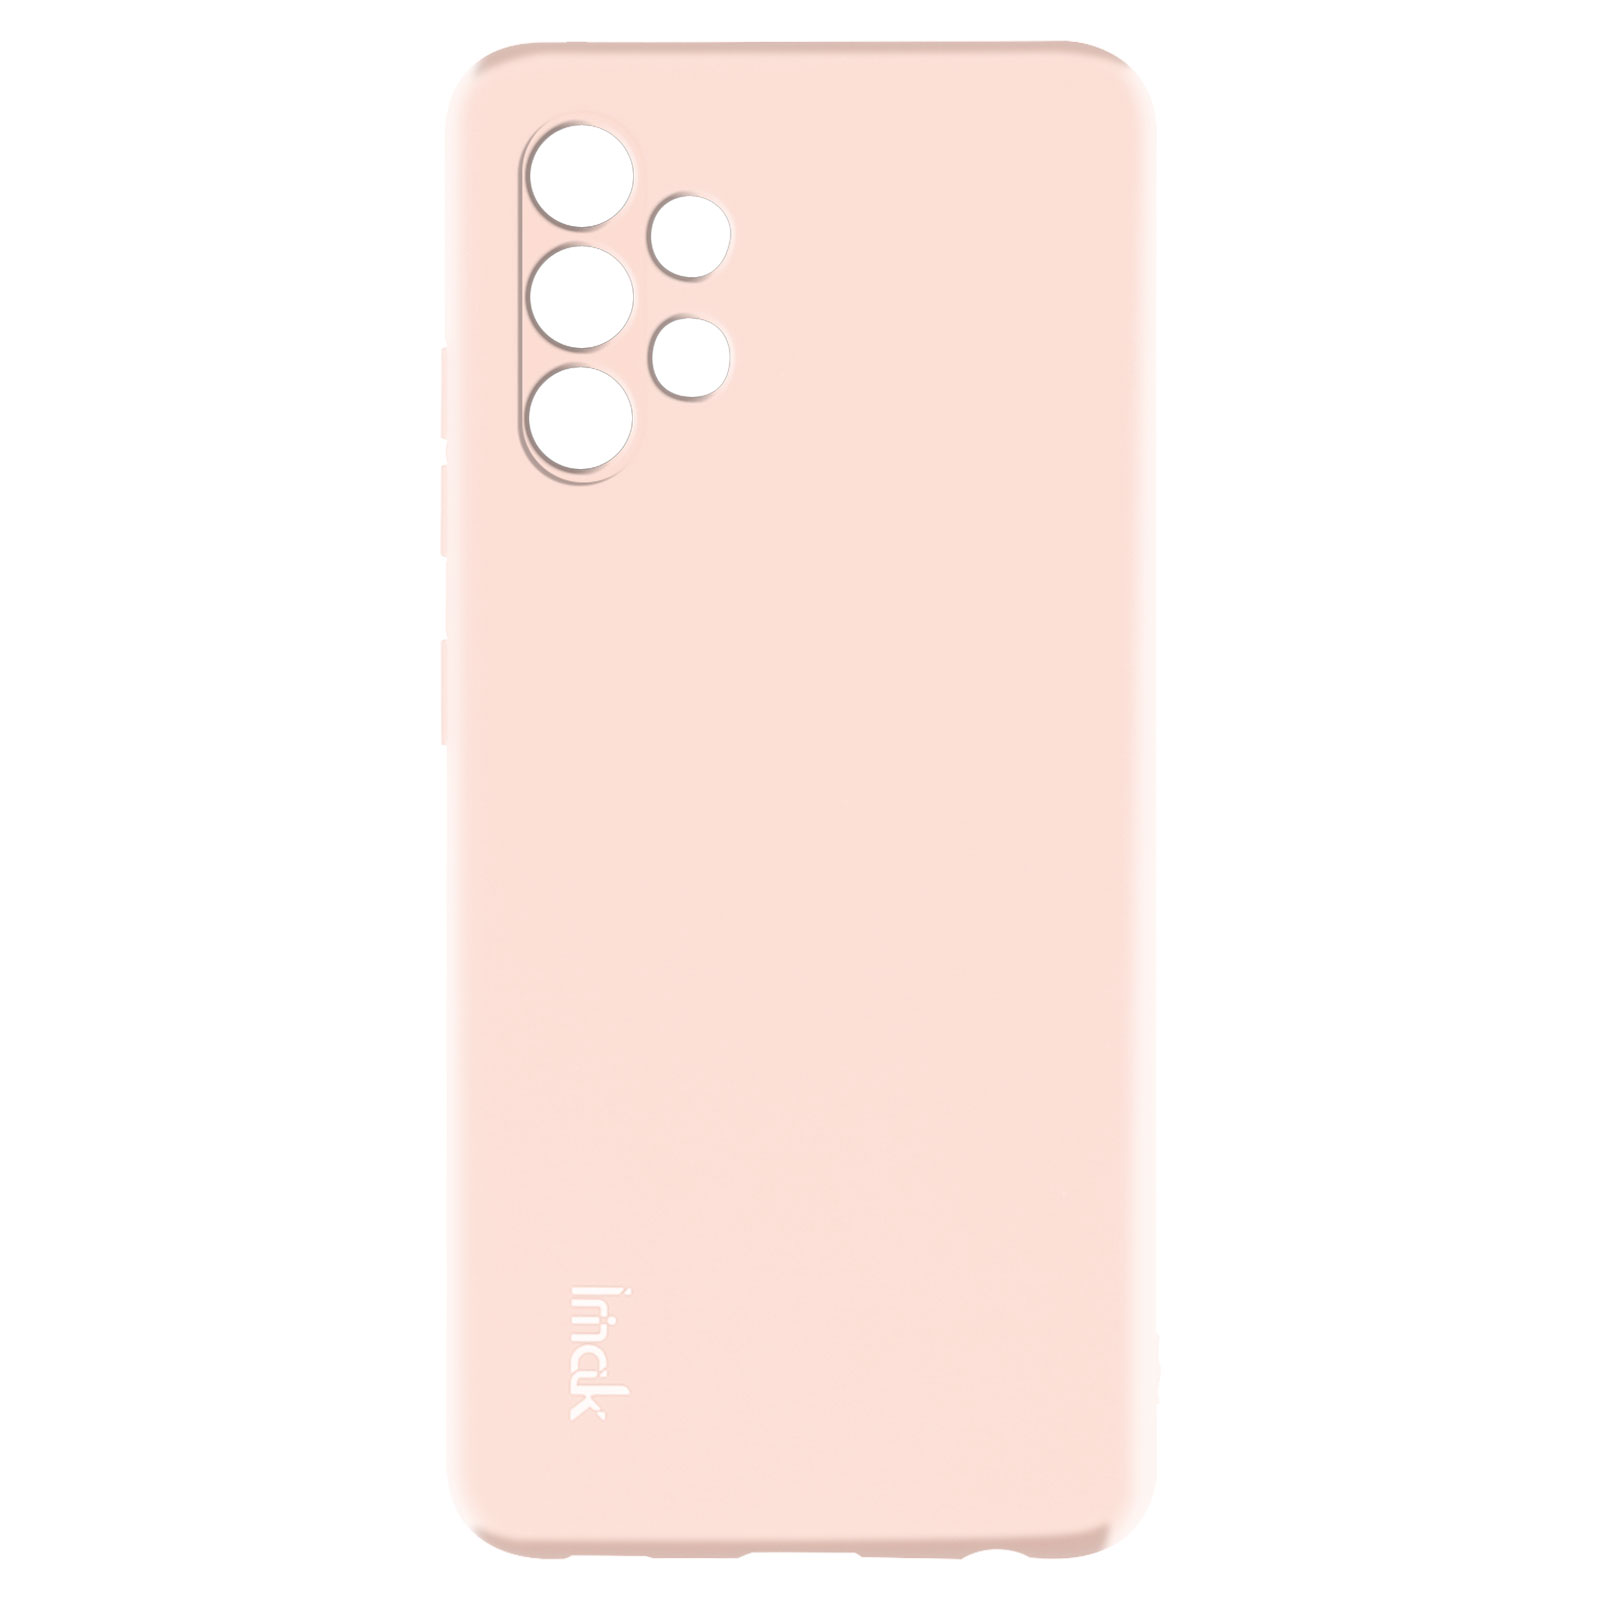 IMAK Soft Touch Backcover, A32, Galaxy Rosa Series, Samsung